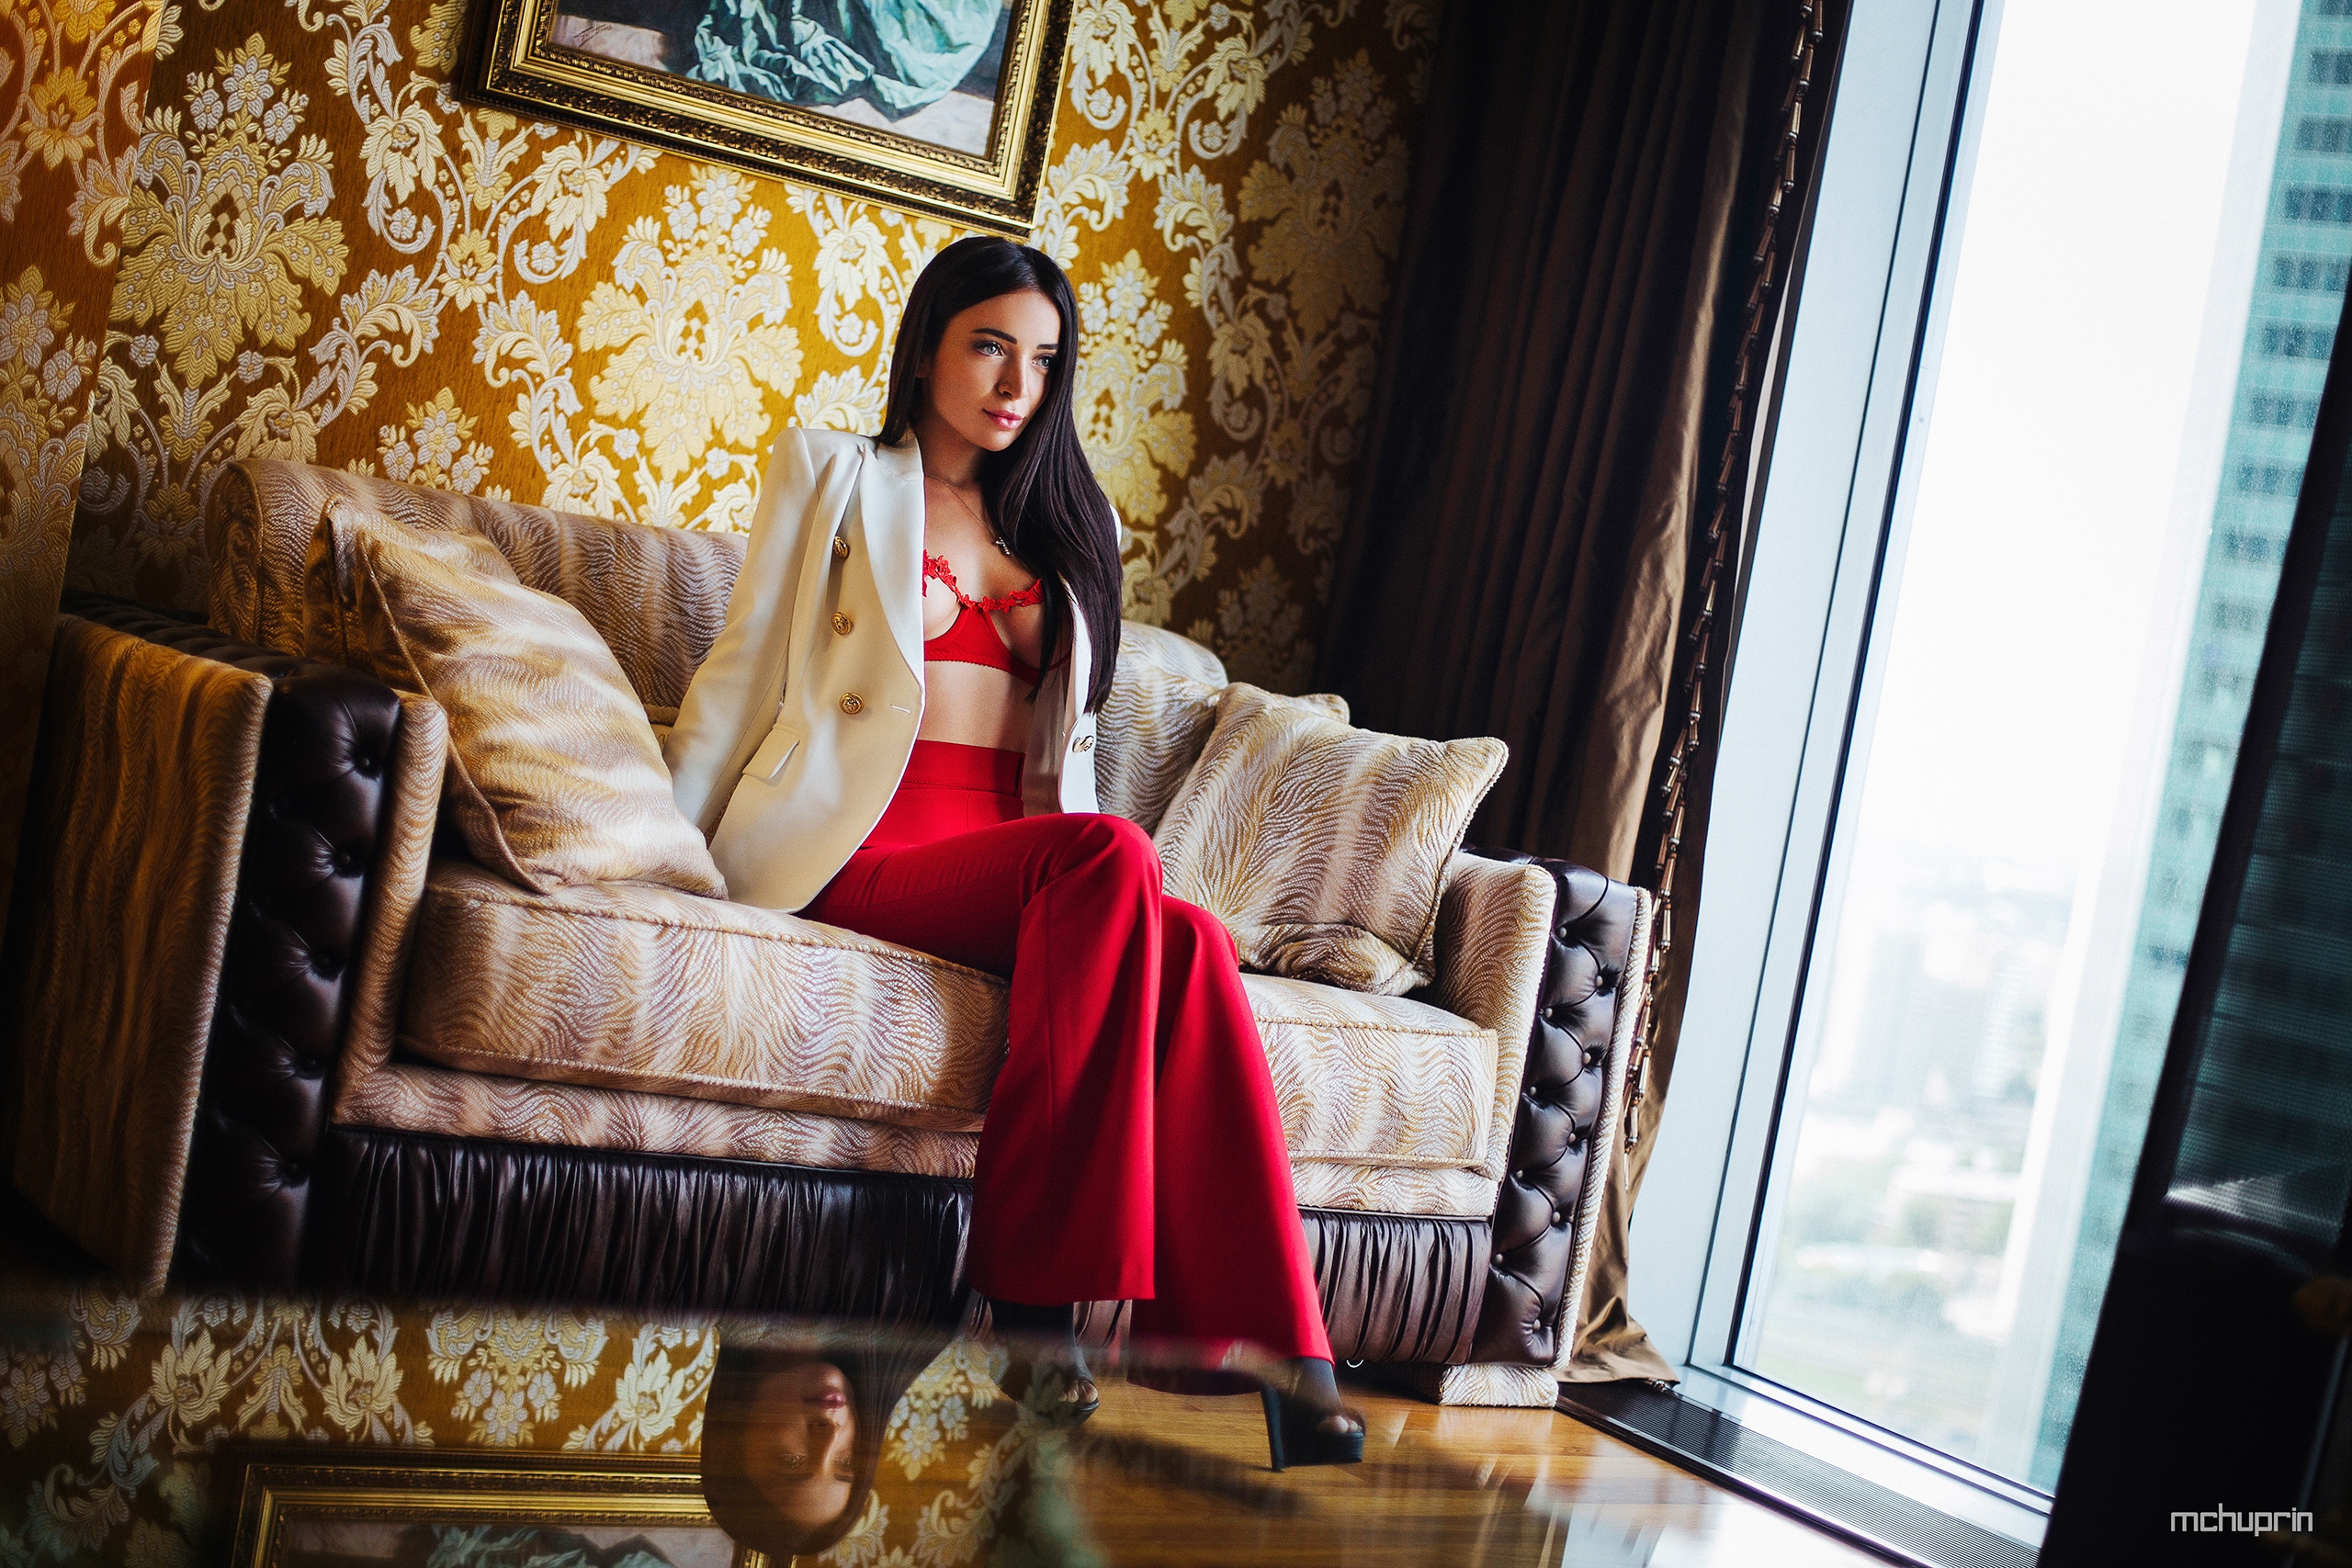 People 2560x1707 women model long hair looking away coats cleavage lingerie bra red bra pants high heels reflection sitting couch window smiling necklace indoors women indoors Maksim Chuprin